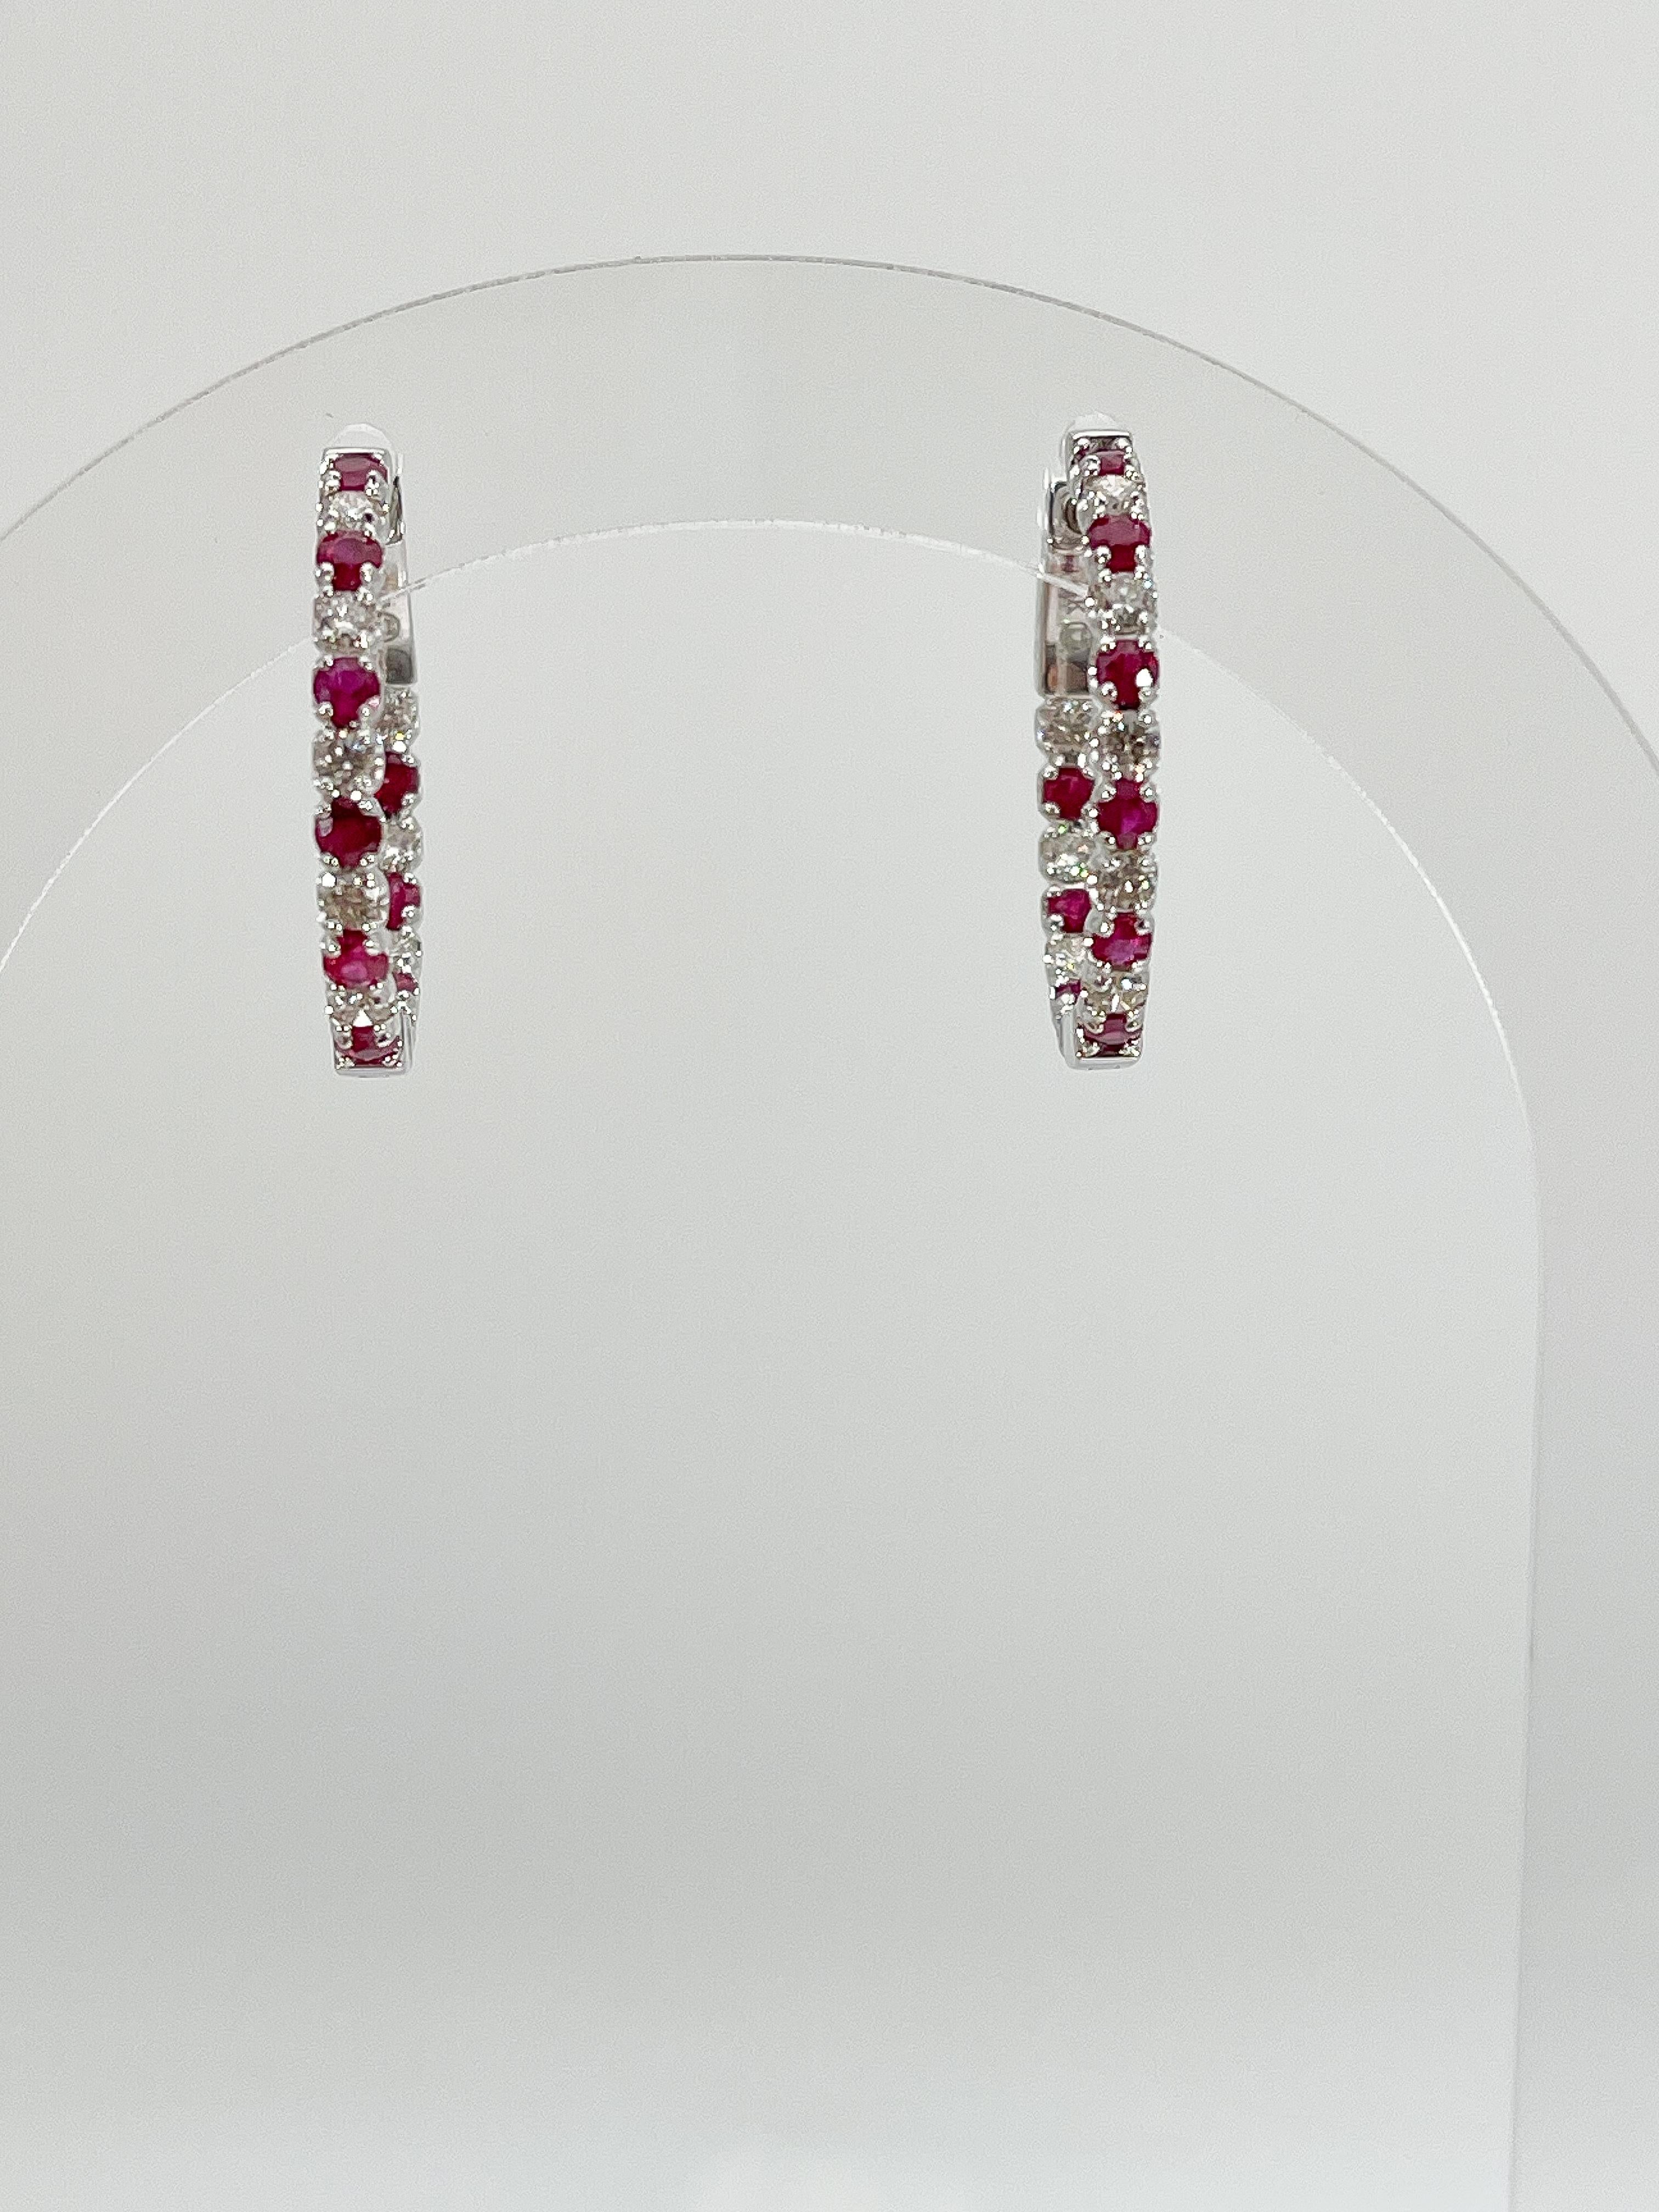 14k white gold .78 CTW diamond and 1.15 CTW ruby hoop earrings. The stones in these earrings are round, the measurements are 23.1 x 23.1, and they have a total weight of 5.12 grams.